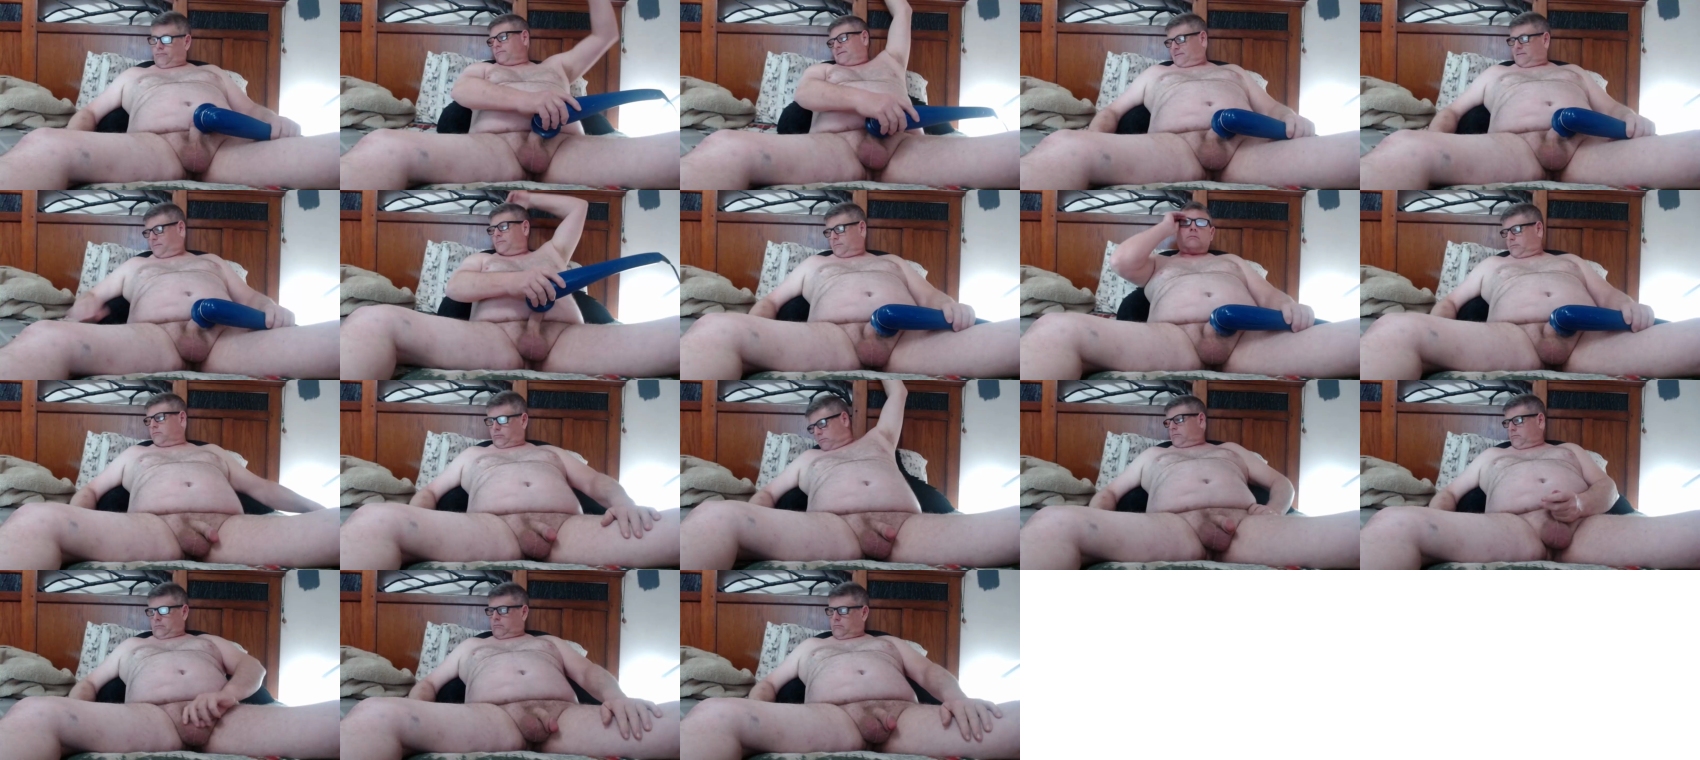 shaunny6  27-01-2022 Males Naked